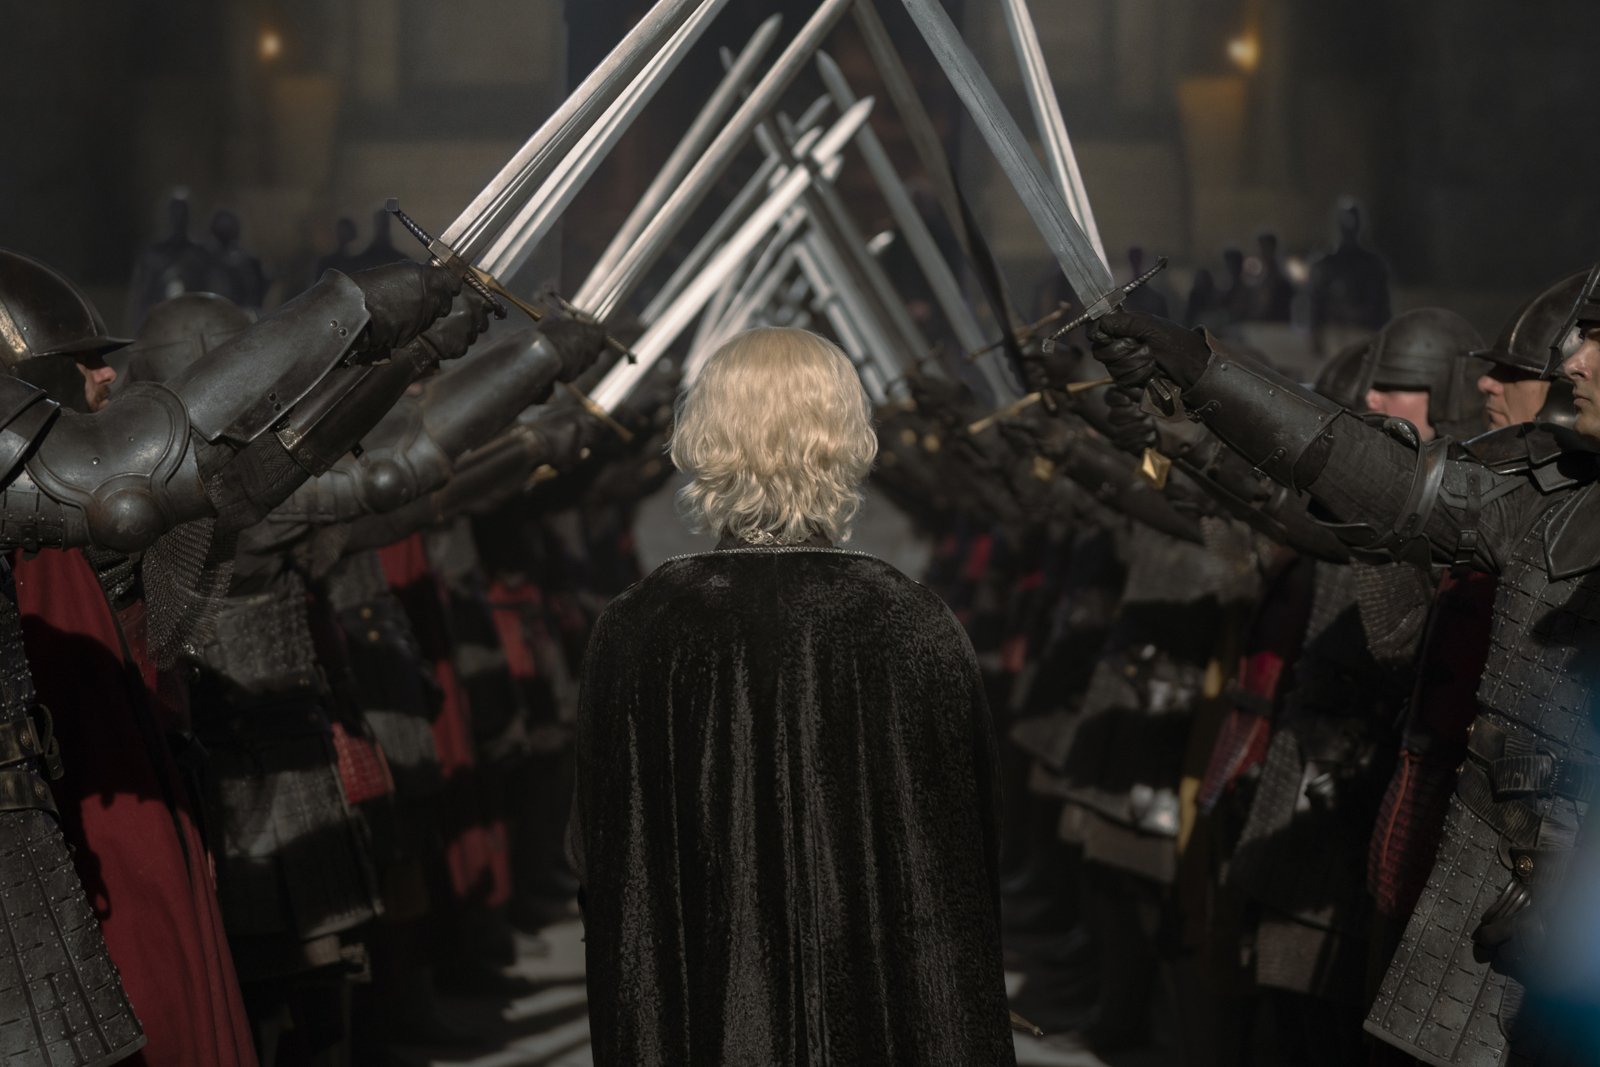 Tom Glynn-Carney as Aegon in 'House of the Dragon' for our article about episode 10/the finale and its release date. He's walking through a crowd of people with their swords raised.